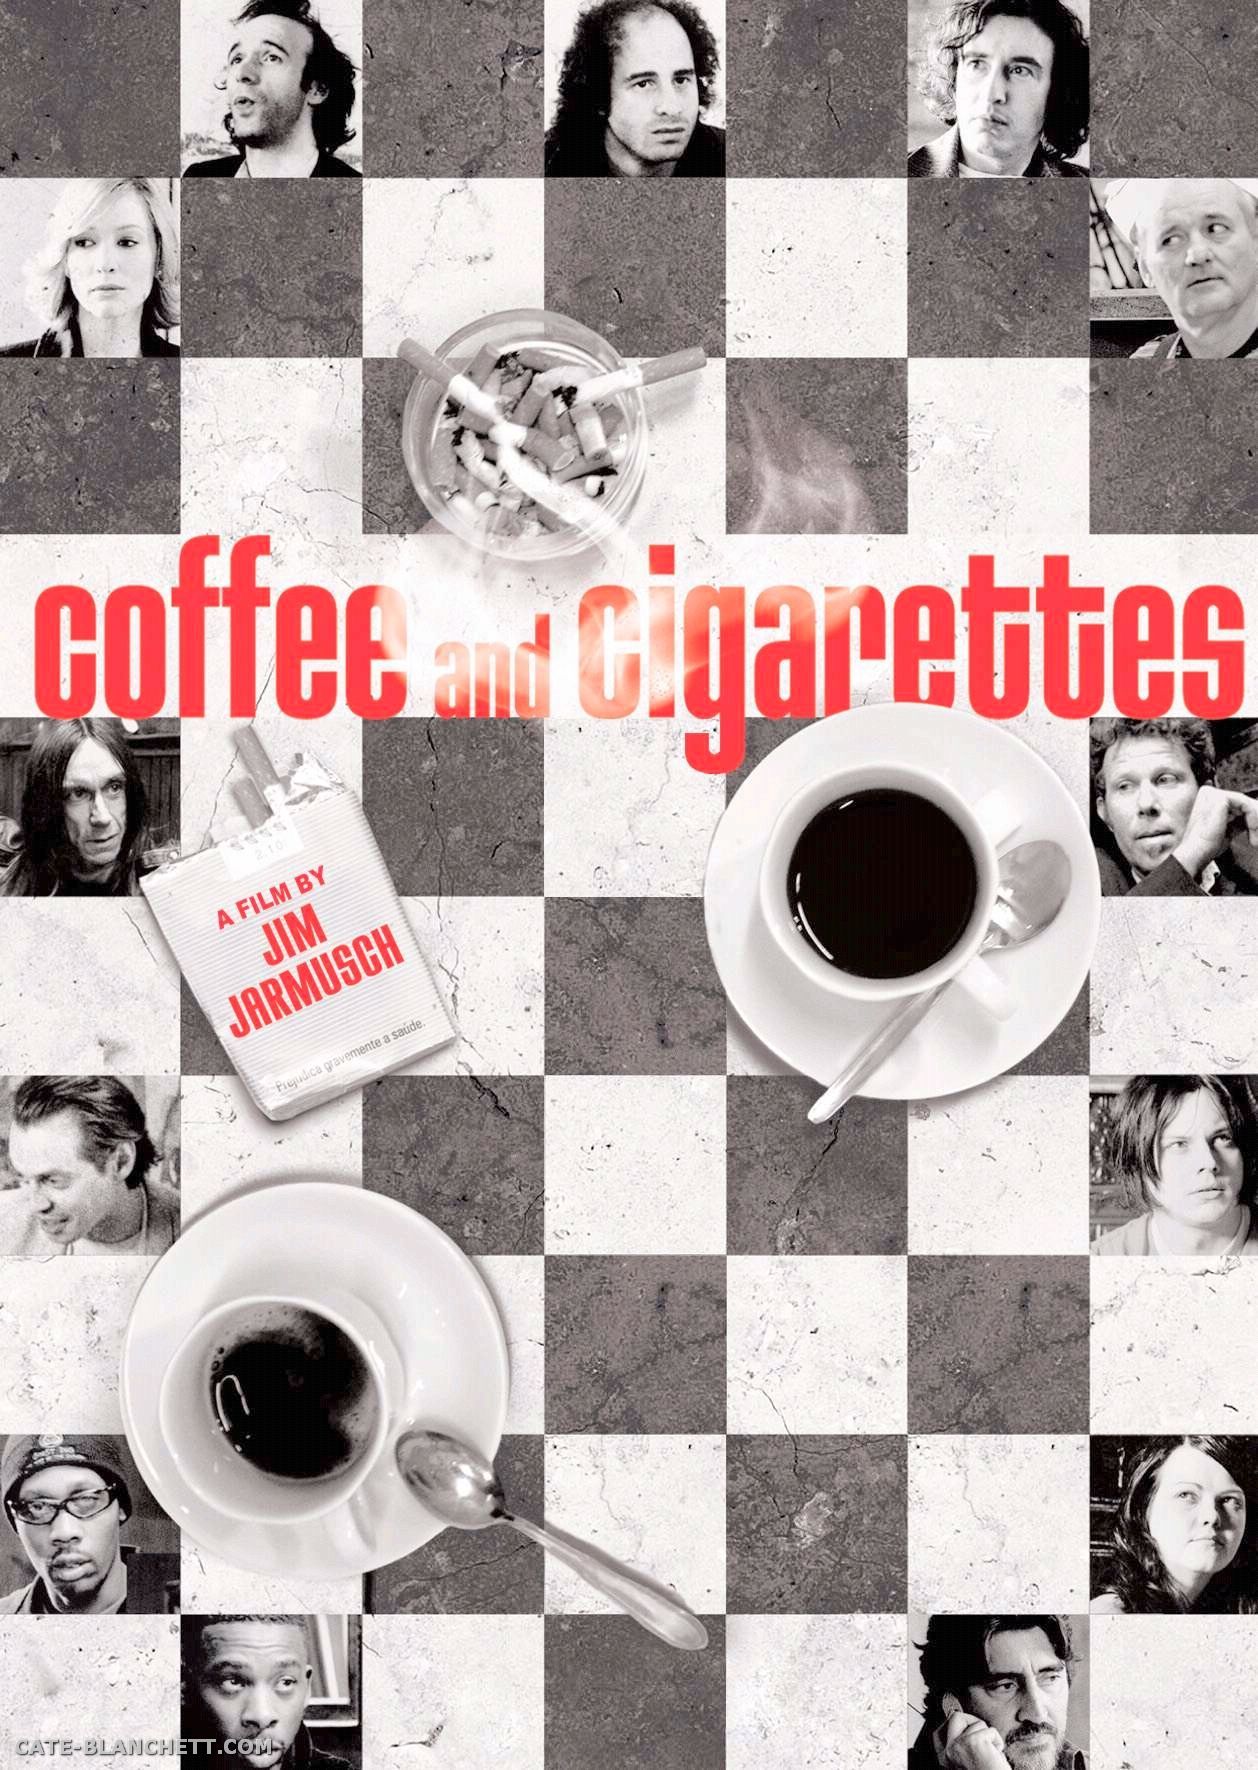 CoffeeandCigarettes-Posters_008.jpg